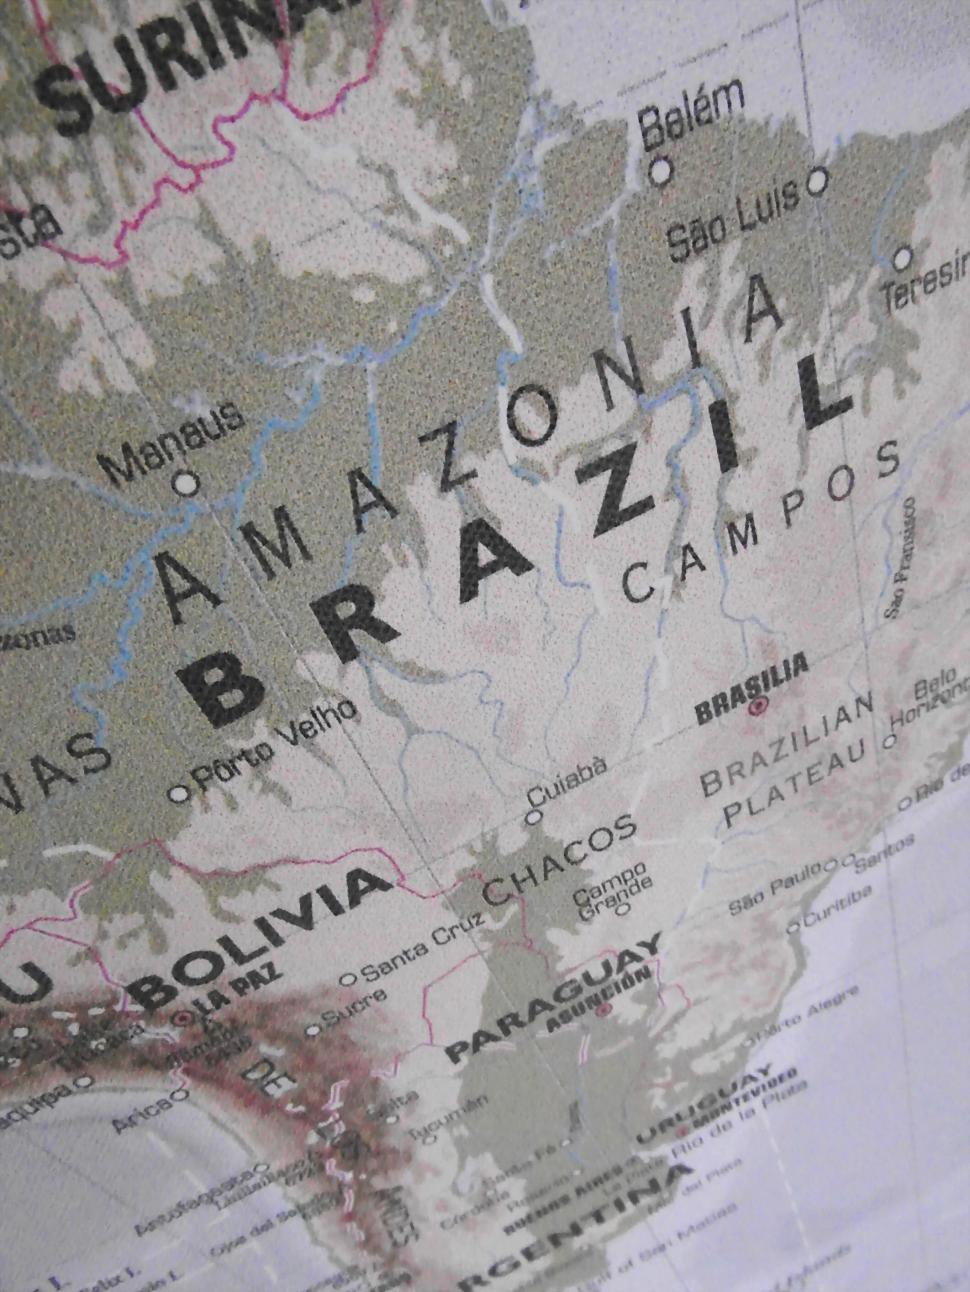 Free Image of Map of Brazil 